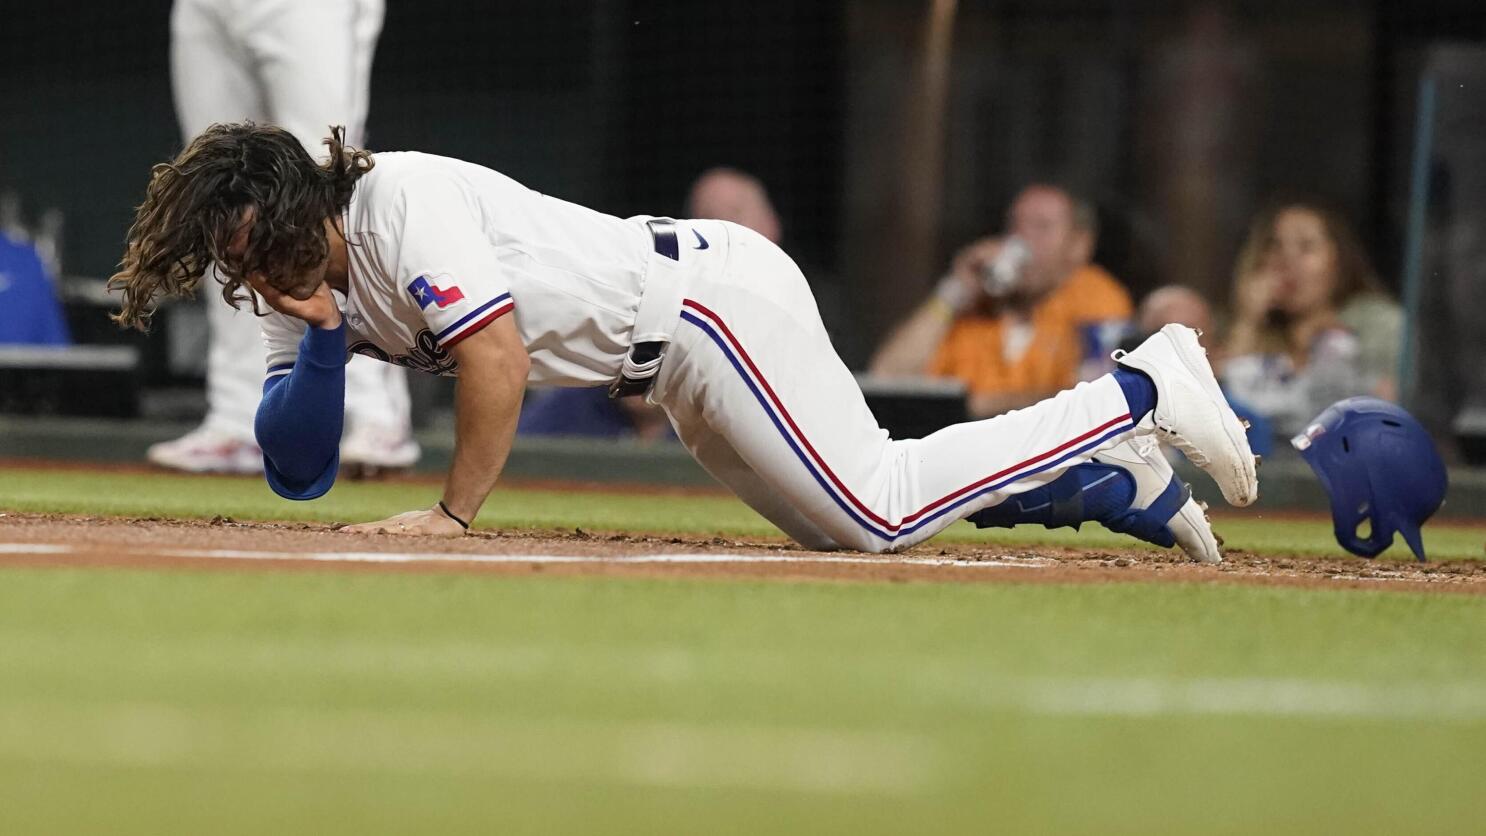 Josh Smith injury: Texas Rangers outfielder hit in face by pitch